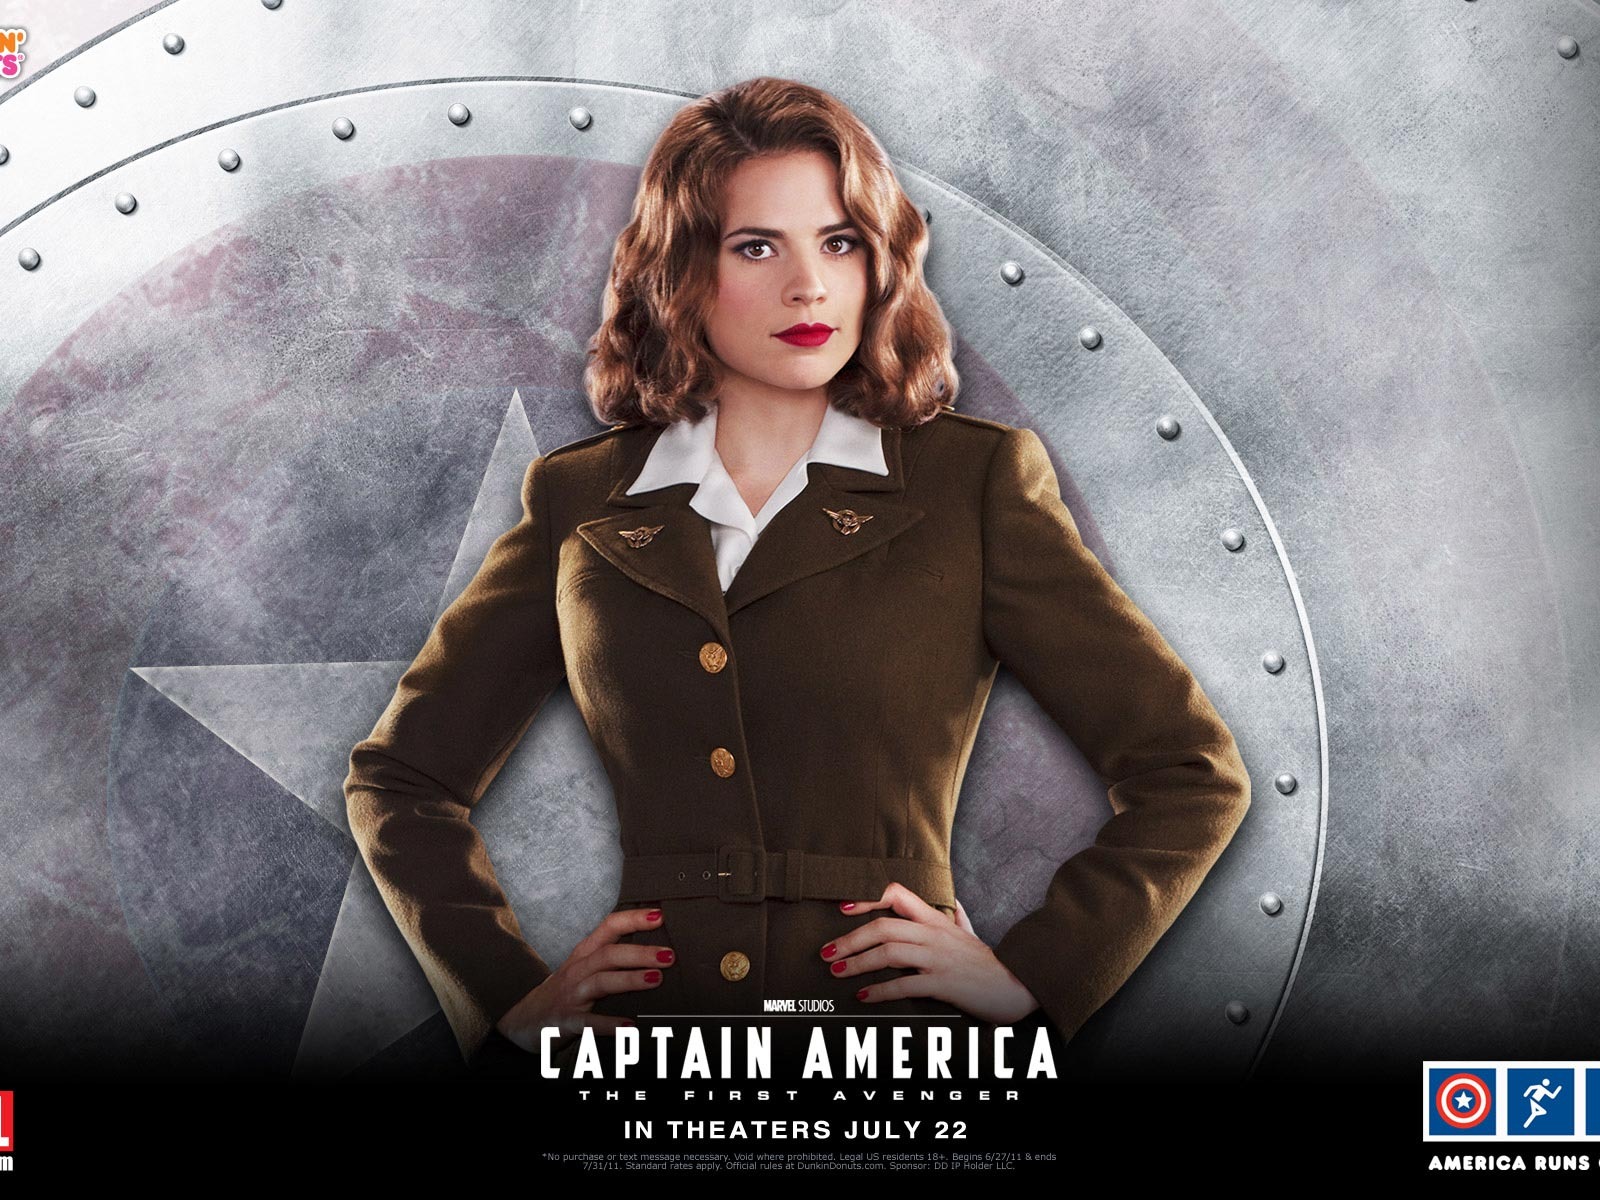 Captain America: The First Avenger wallpapers HD #8 - 1600x1200